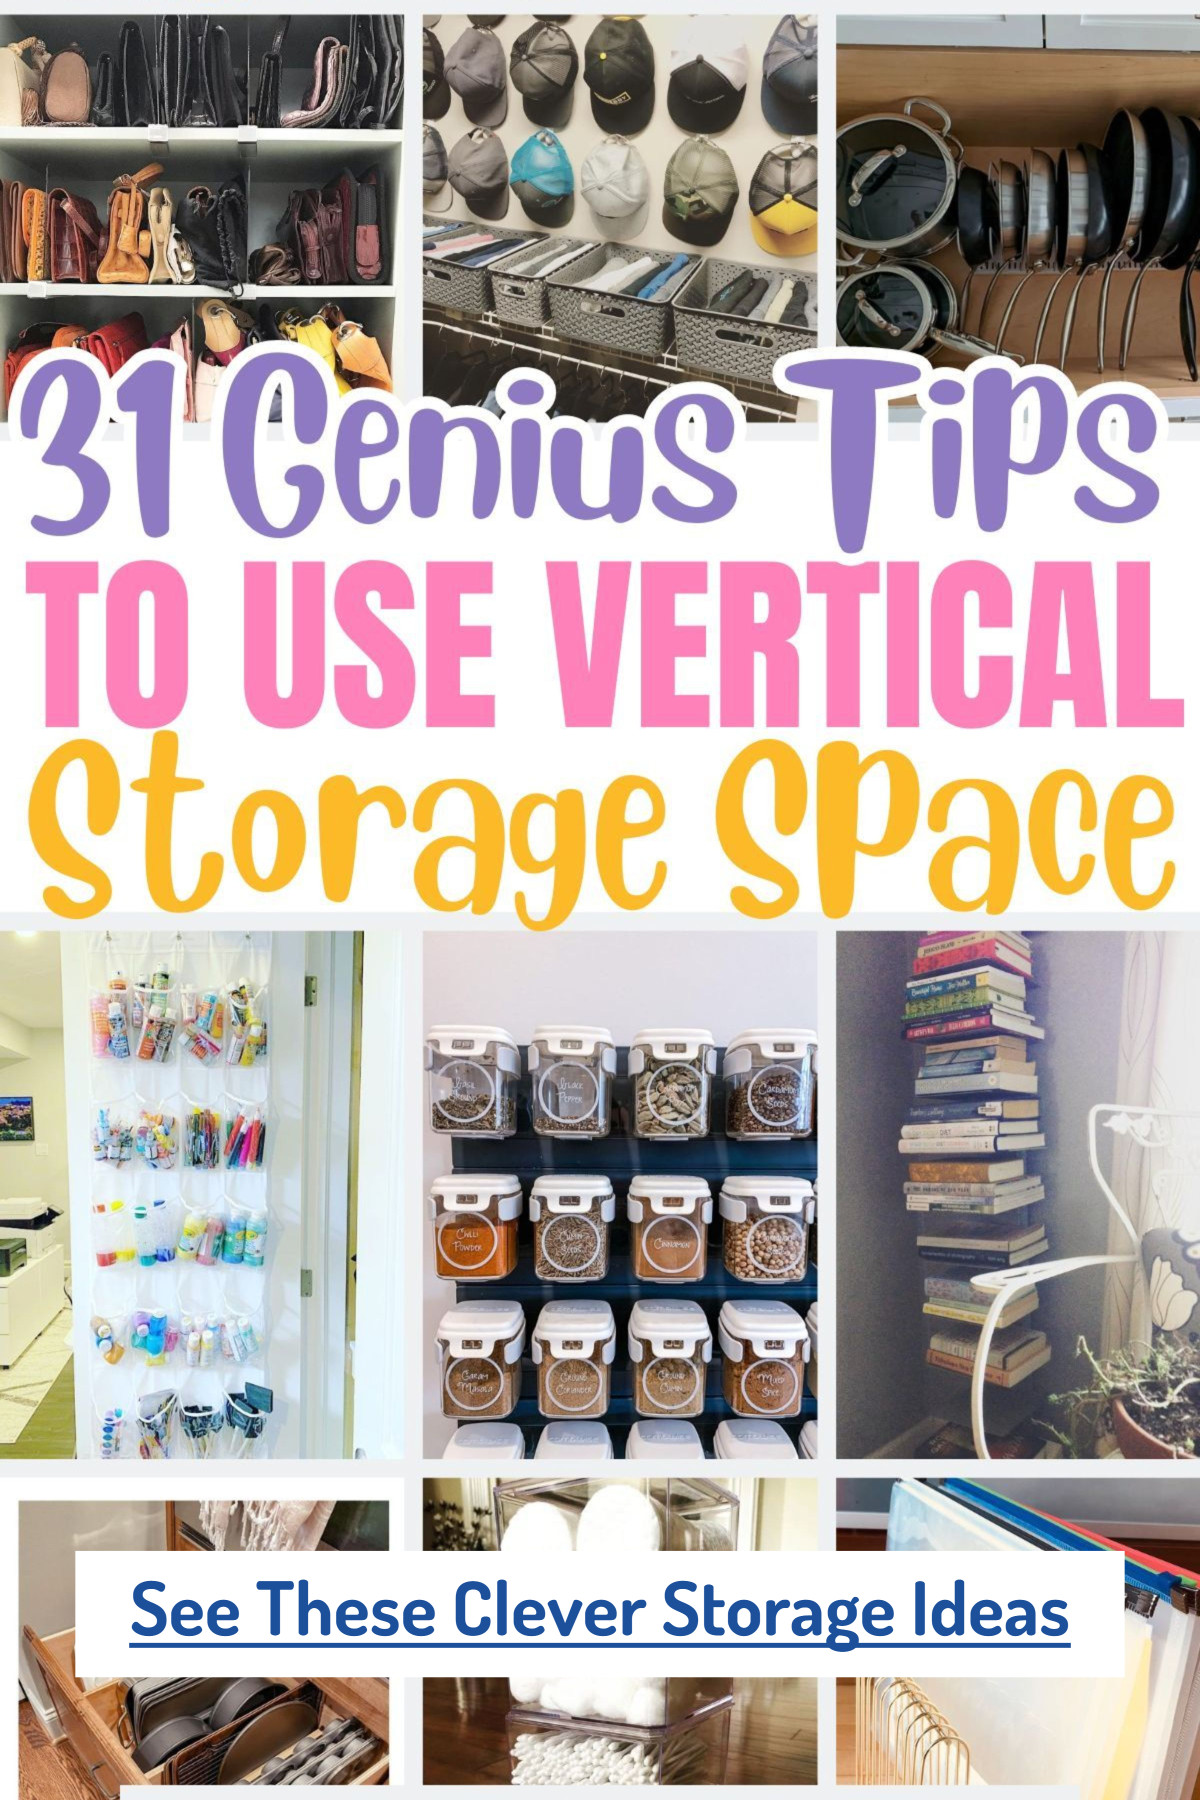 Tips to use vertical storage space